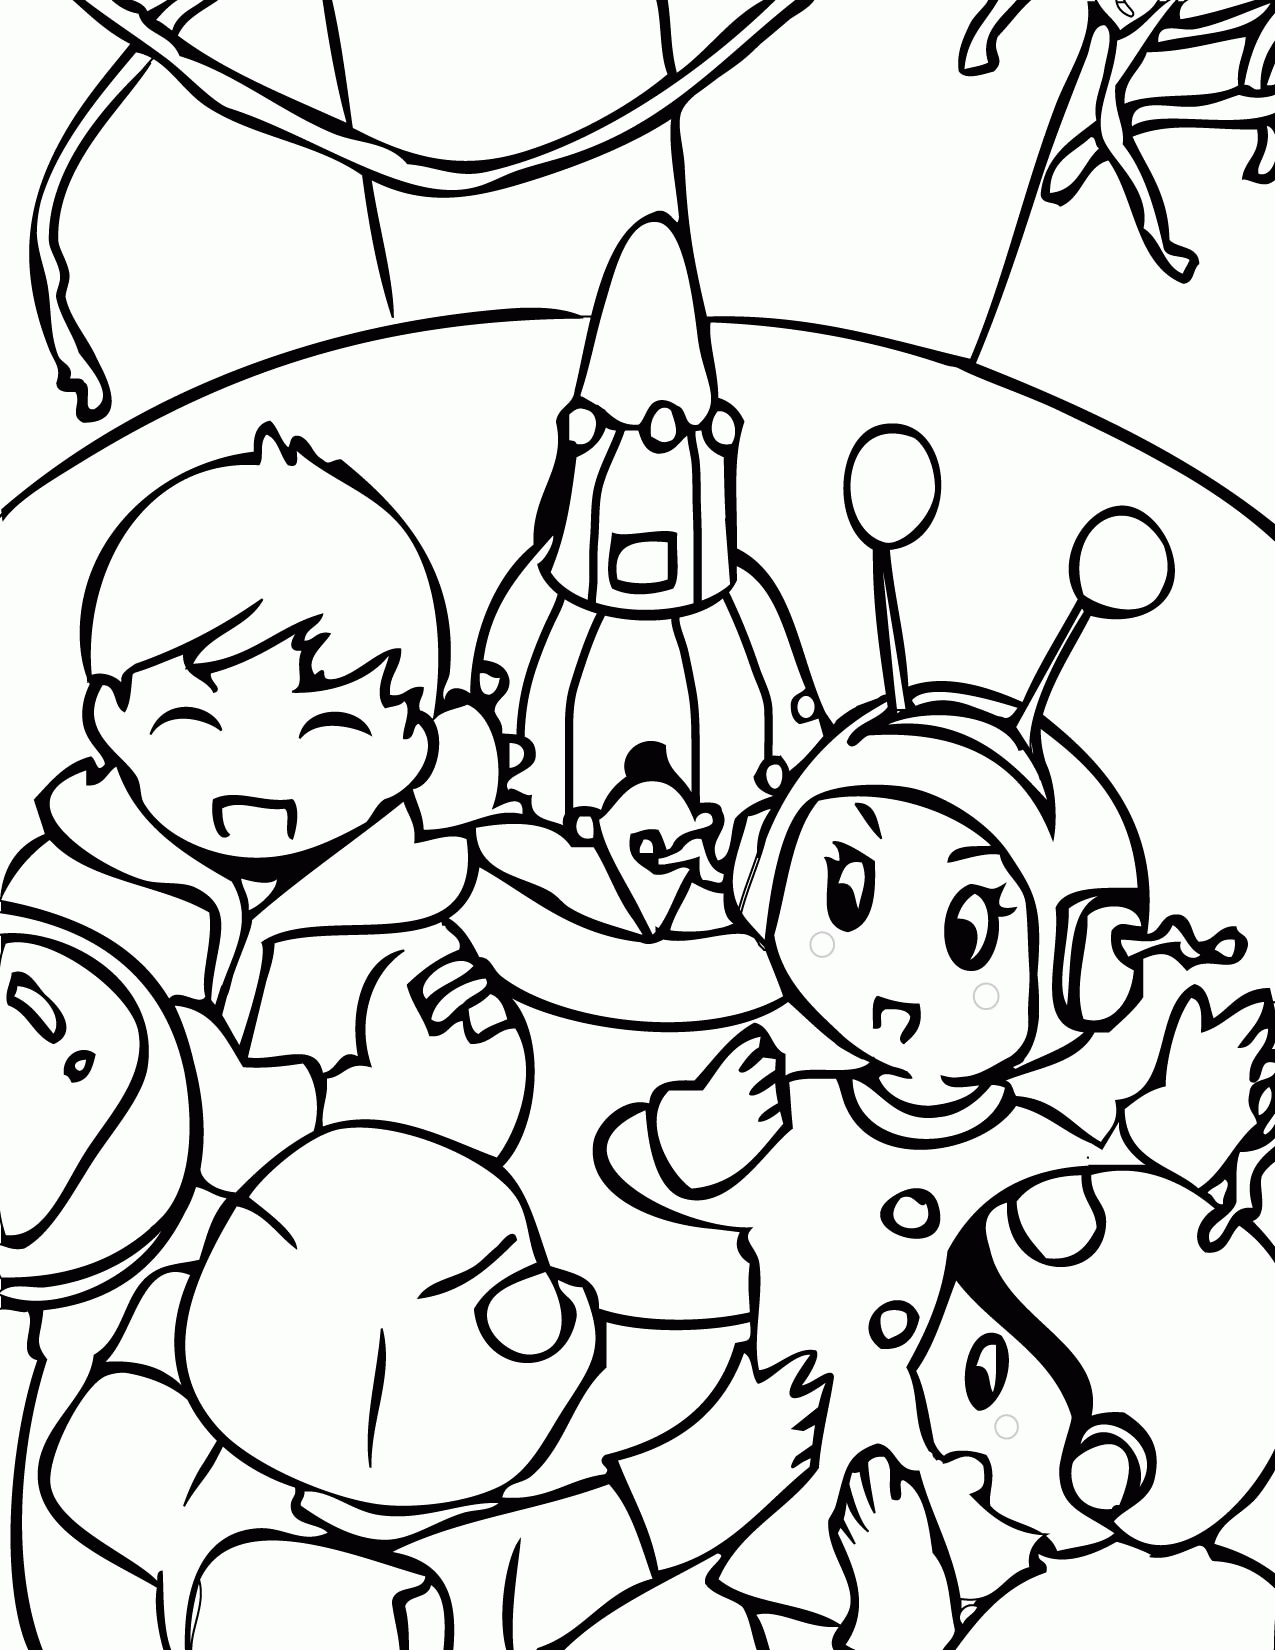 Outer Space Coloring Page - Handipoints